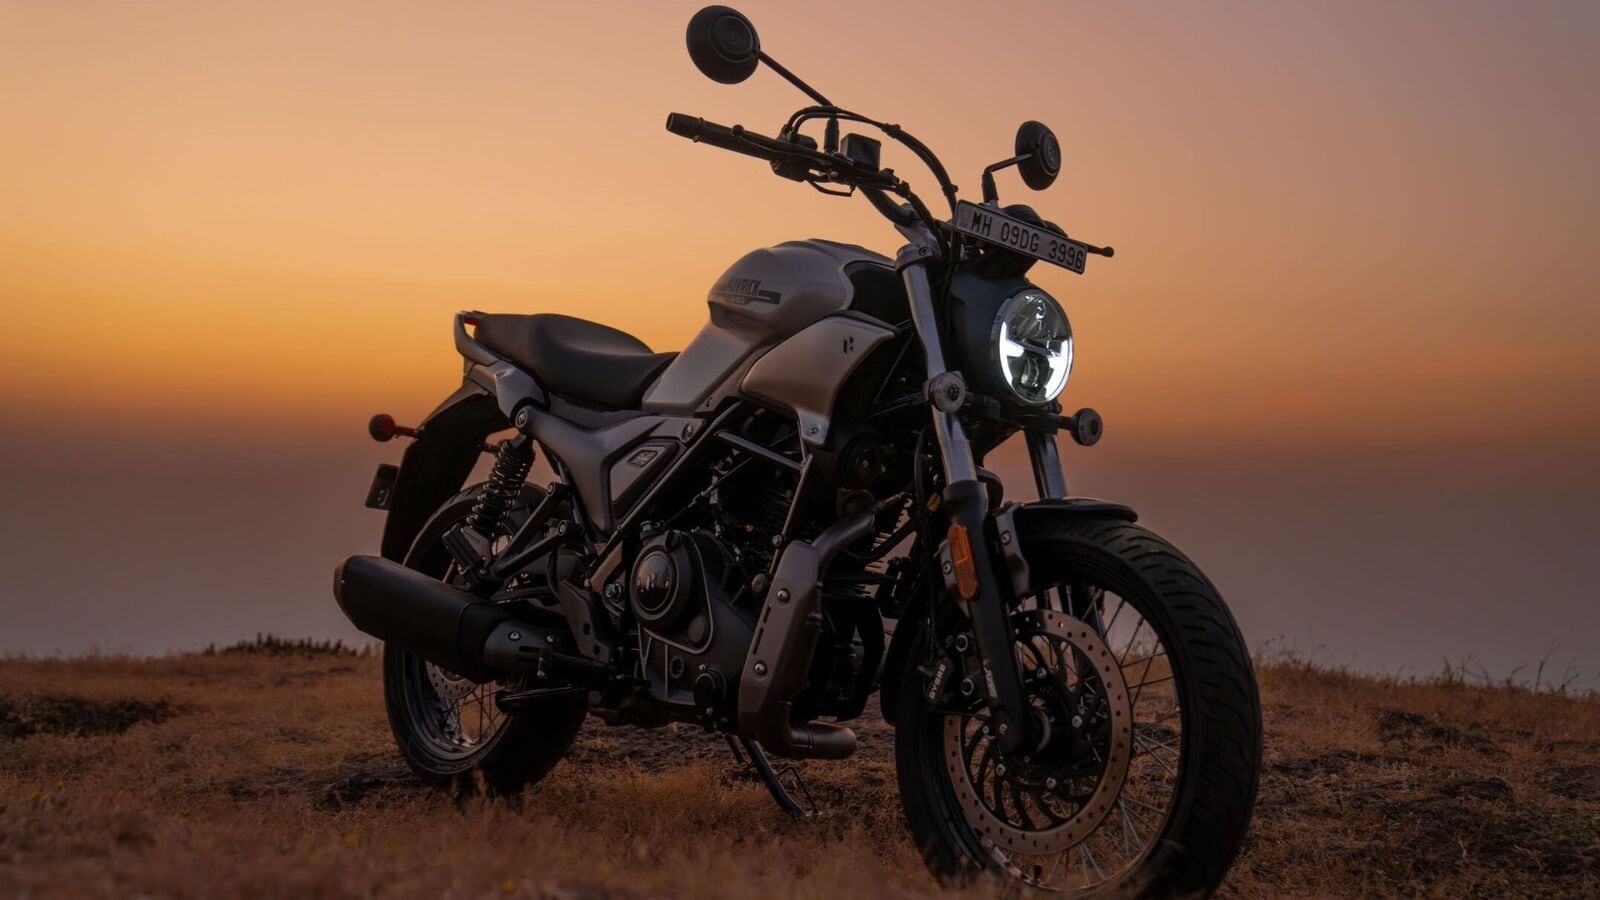 Hero Mavrick Scrambler 440 trademarked. What it could be?